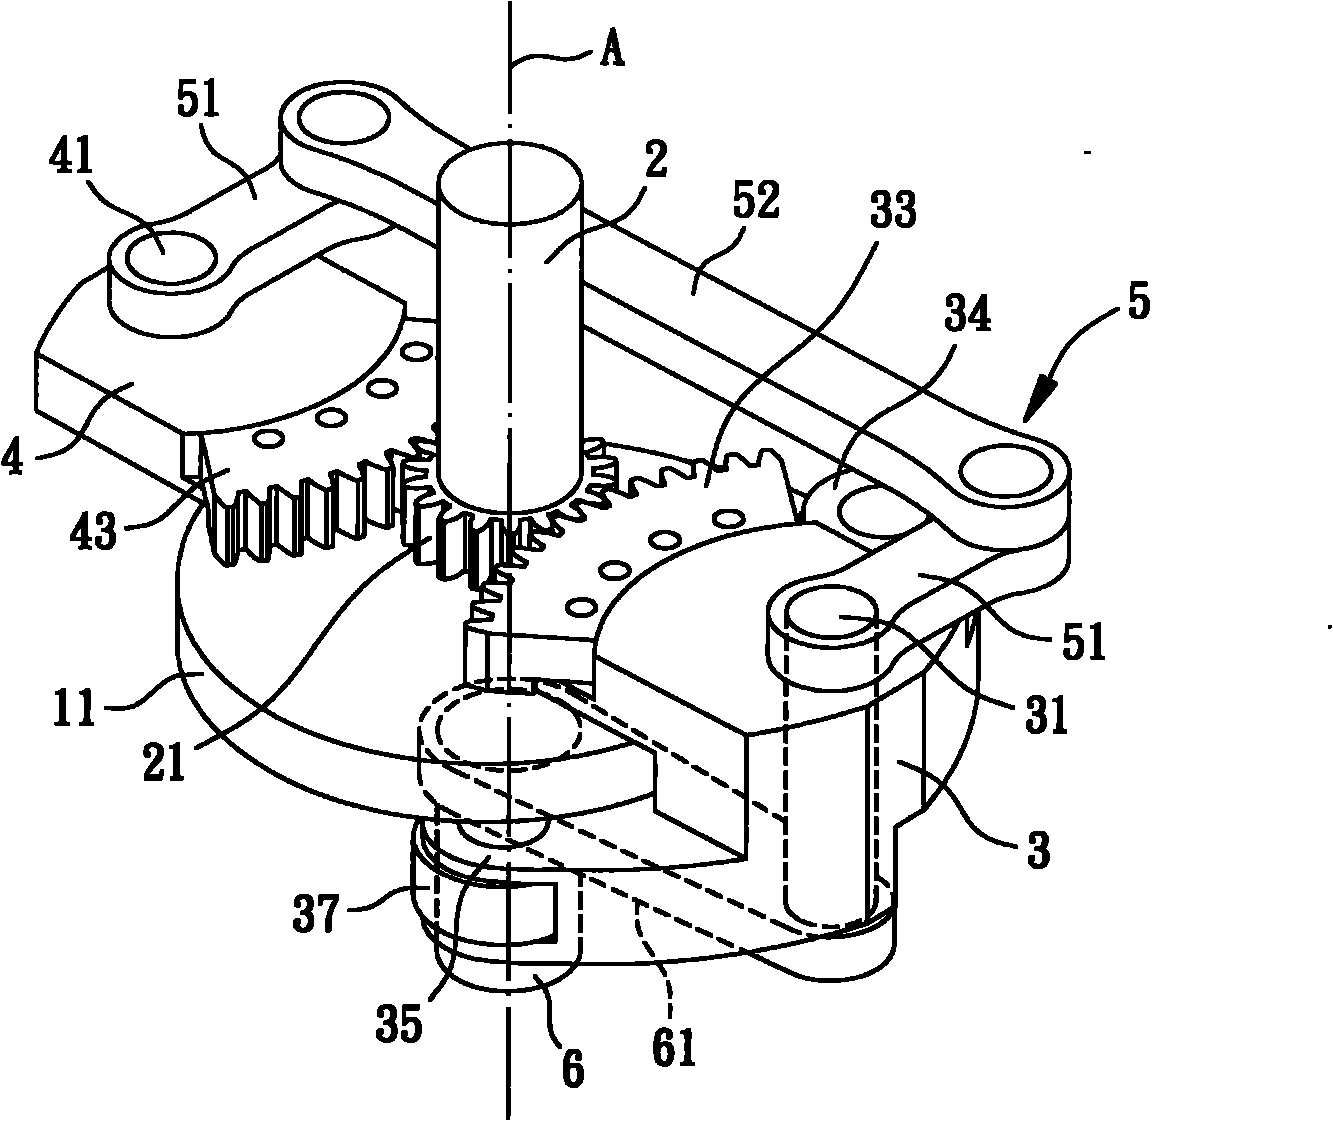 Transmission mechanism with intermittent output action